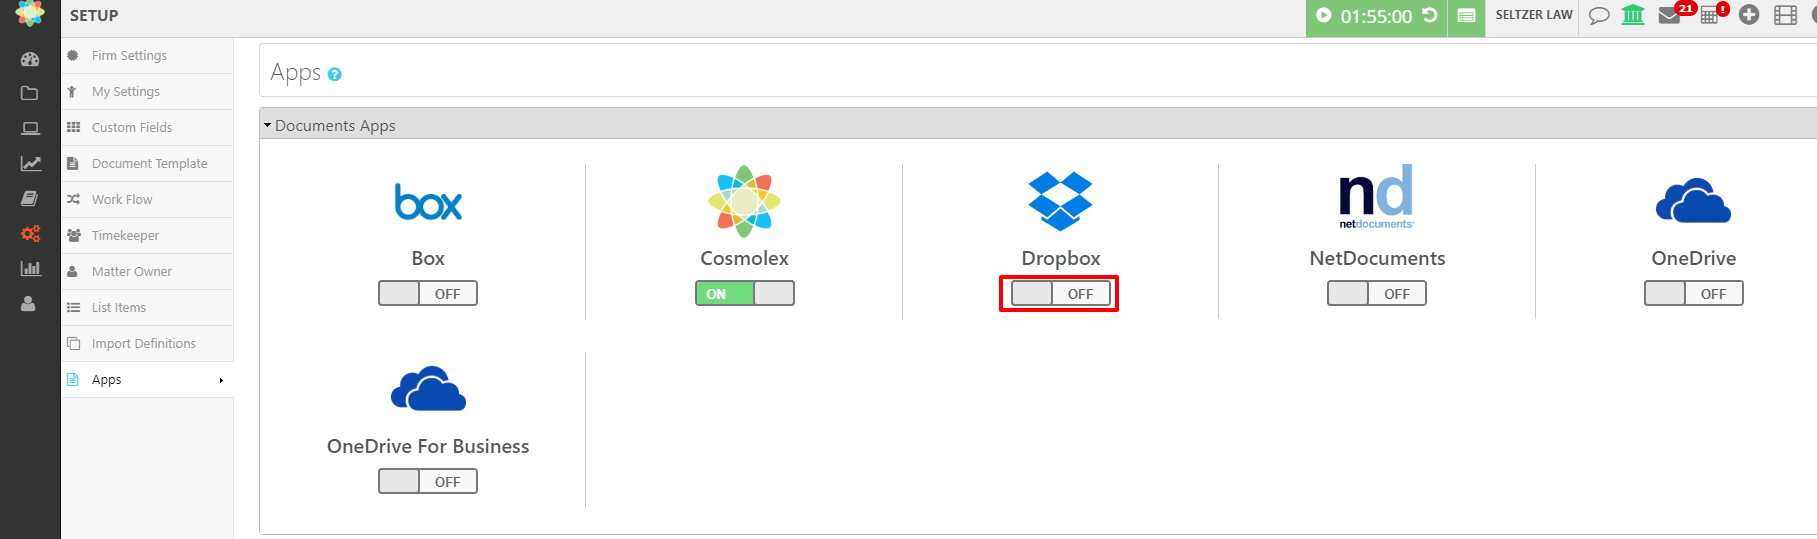 dropbox support crowd sourced